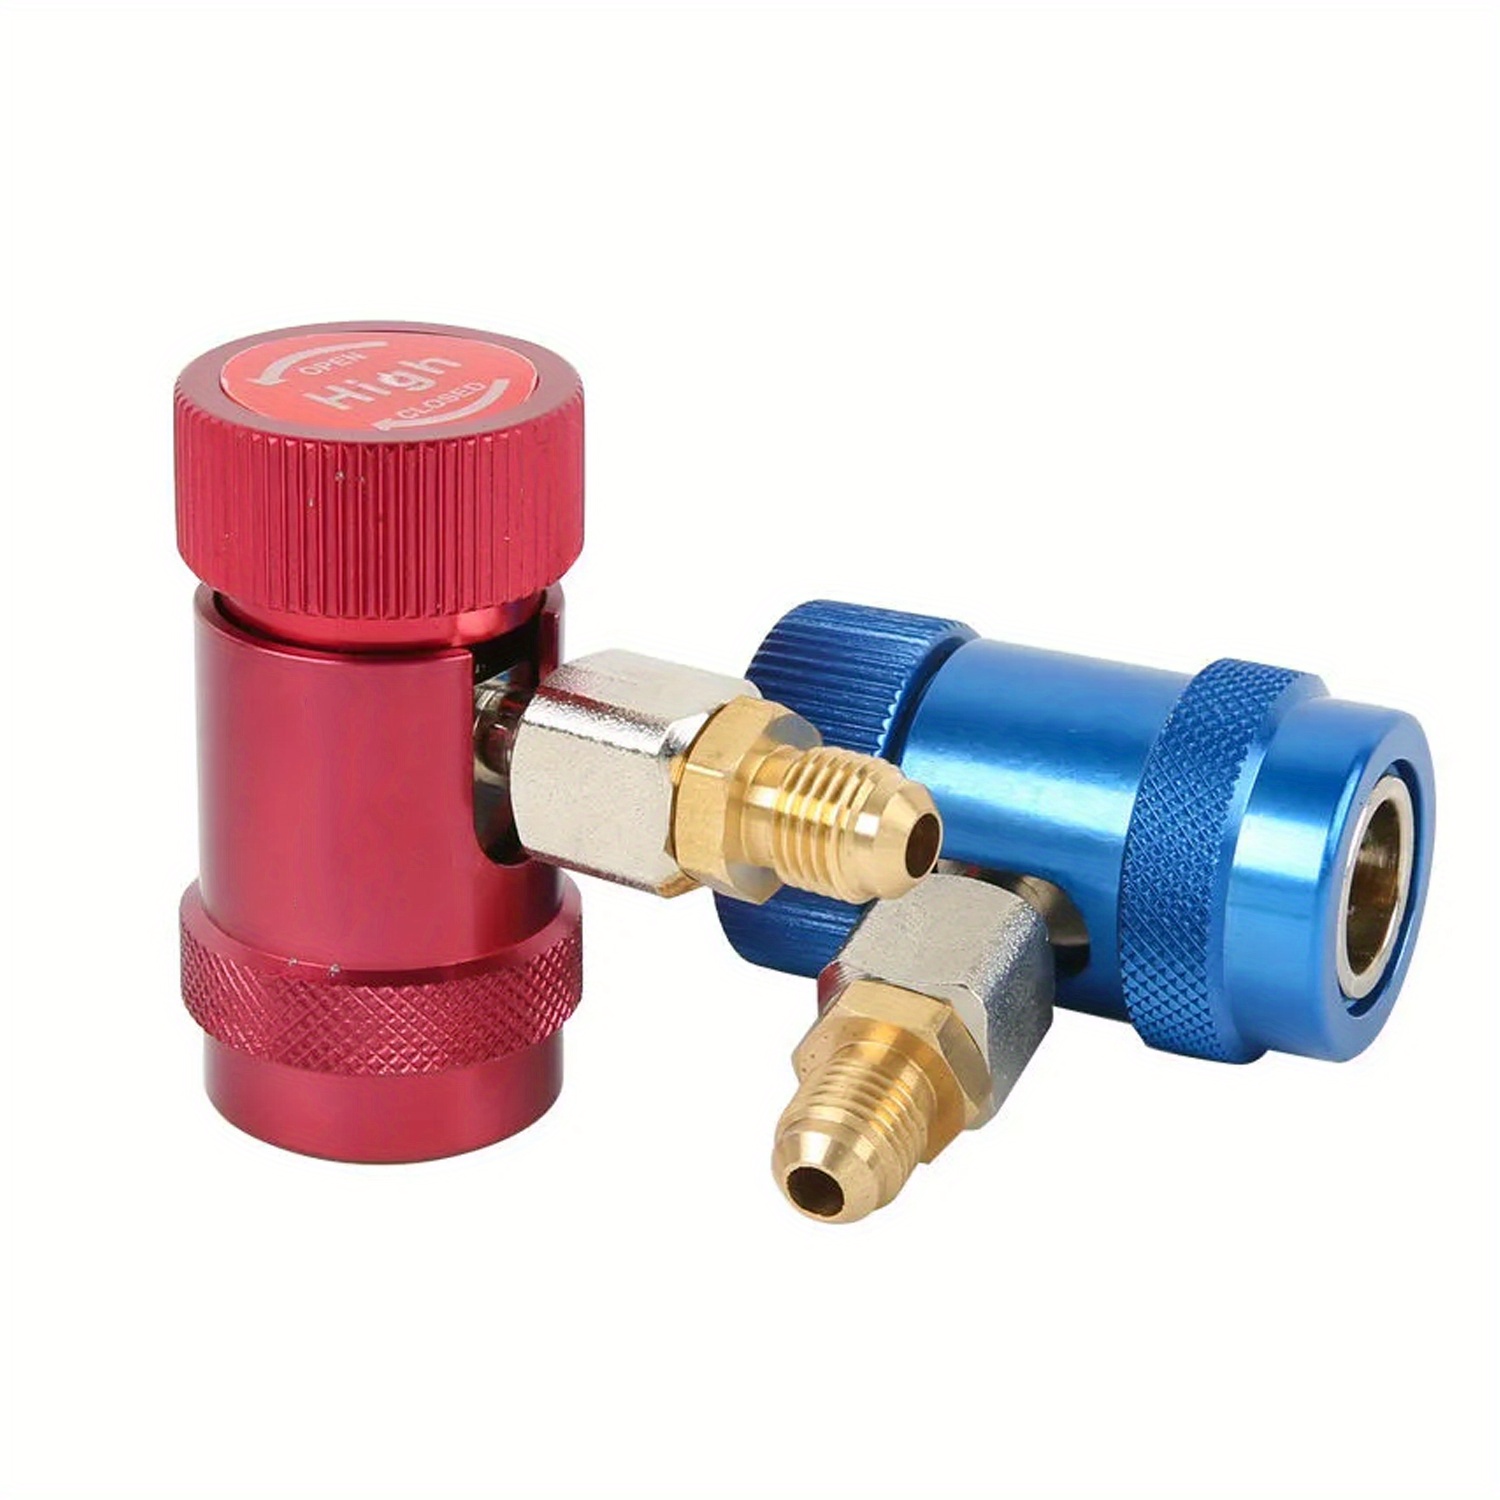 Quick Couplers Connectors Adapters R1234yf To R134a High Low Side Adapter  Fitting Connector Car Airconditioning Fitting